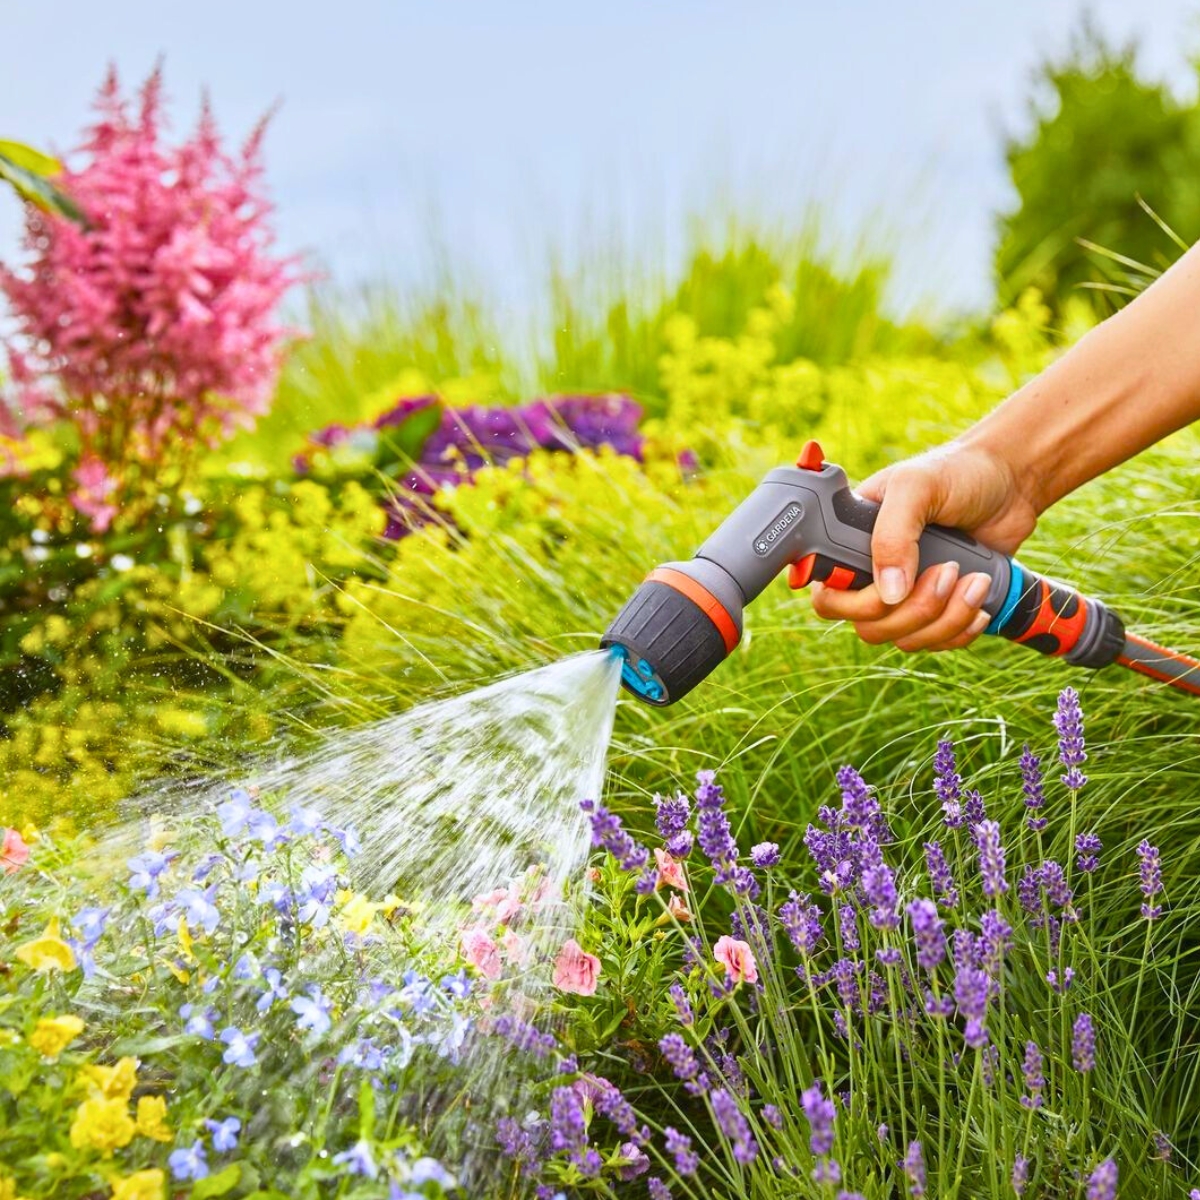 Watering a group of colorful flowers in a garden